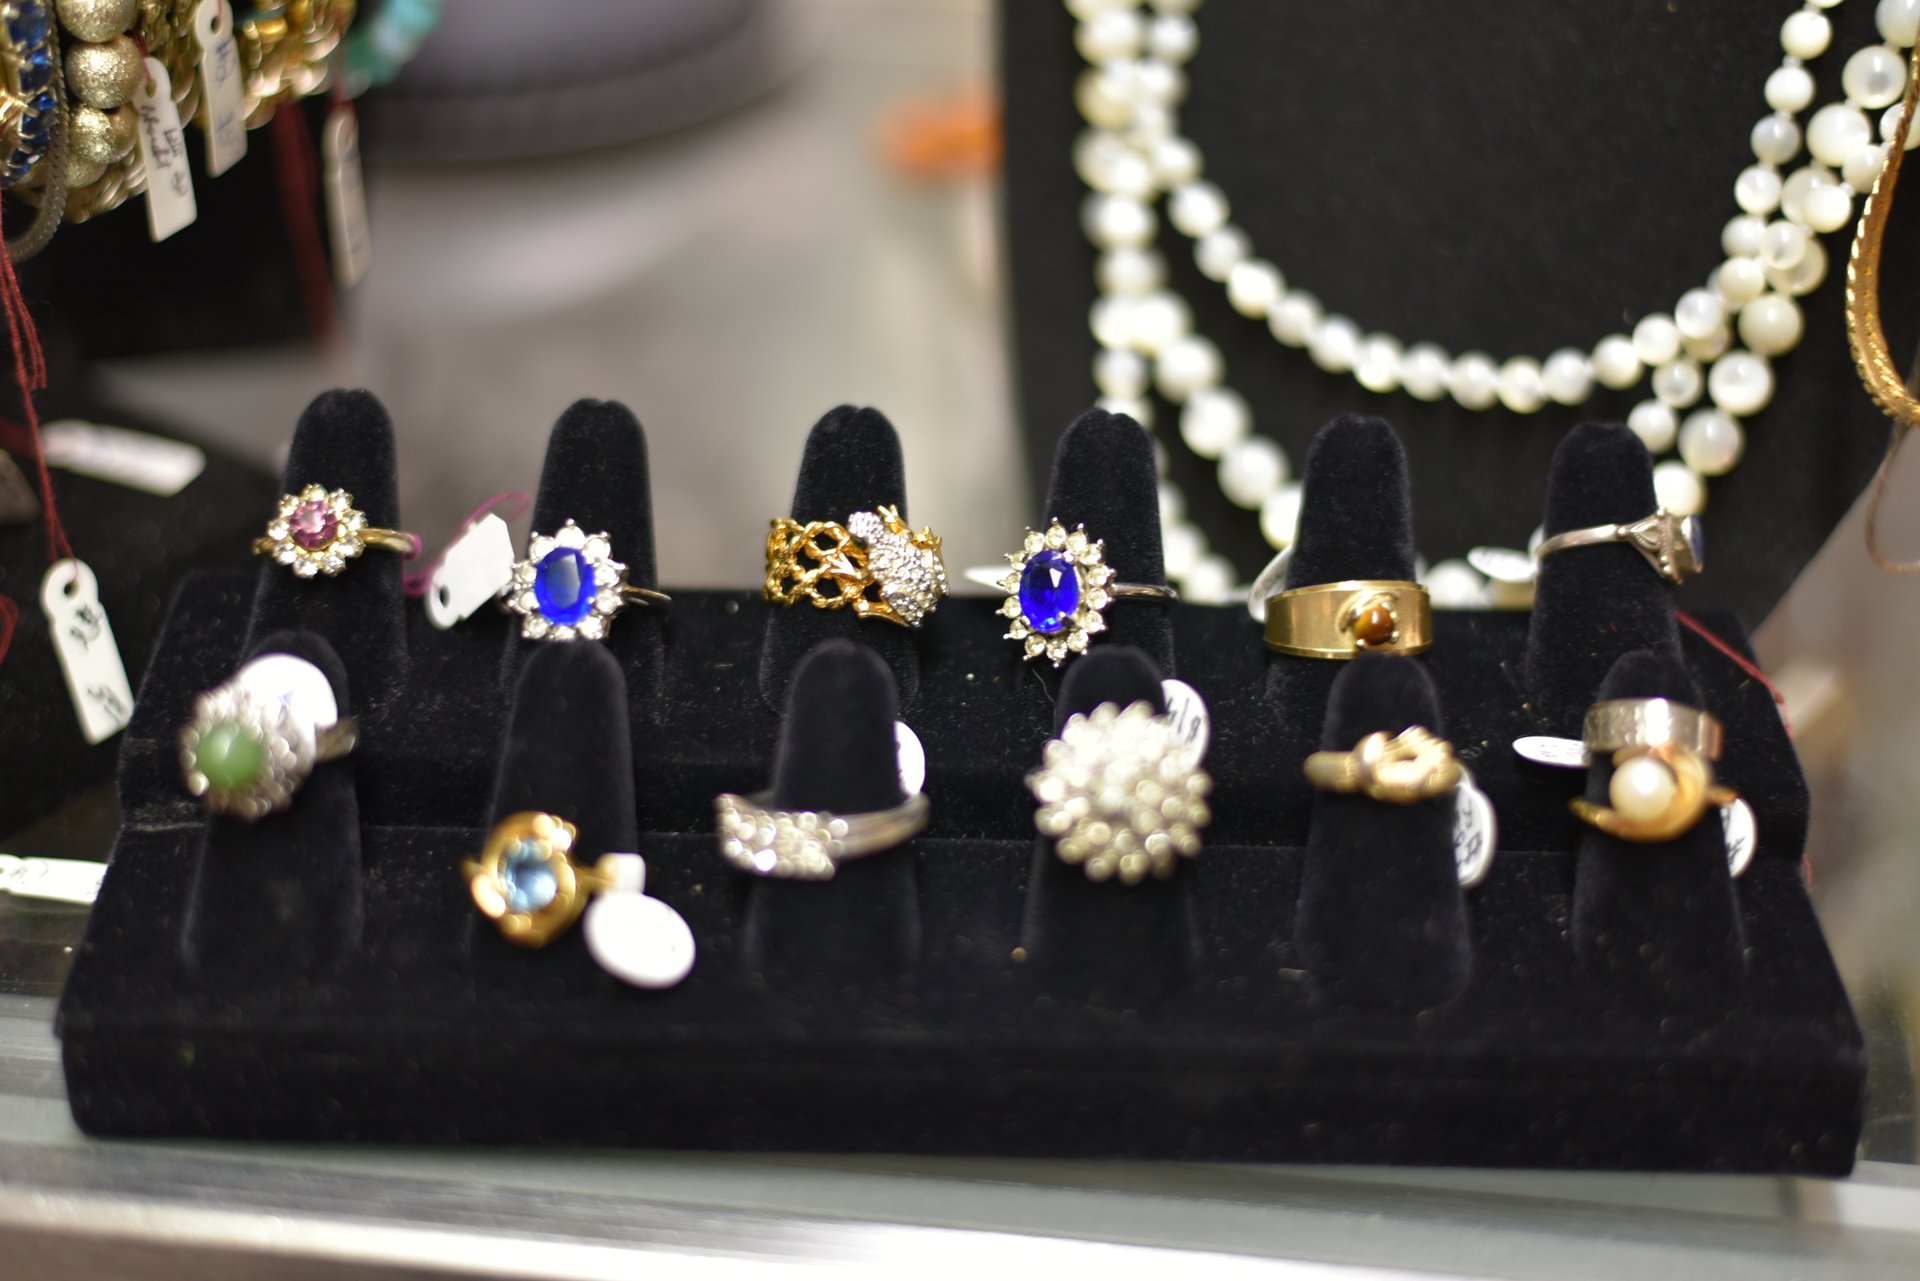 Fashion & Costume Jewelry, Rings & Value Sets